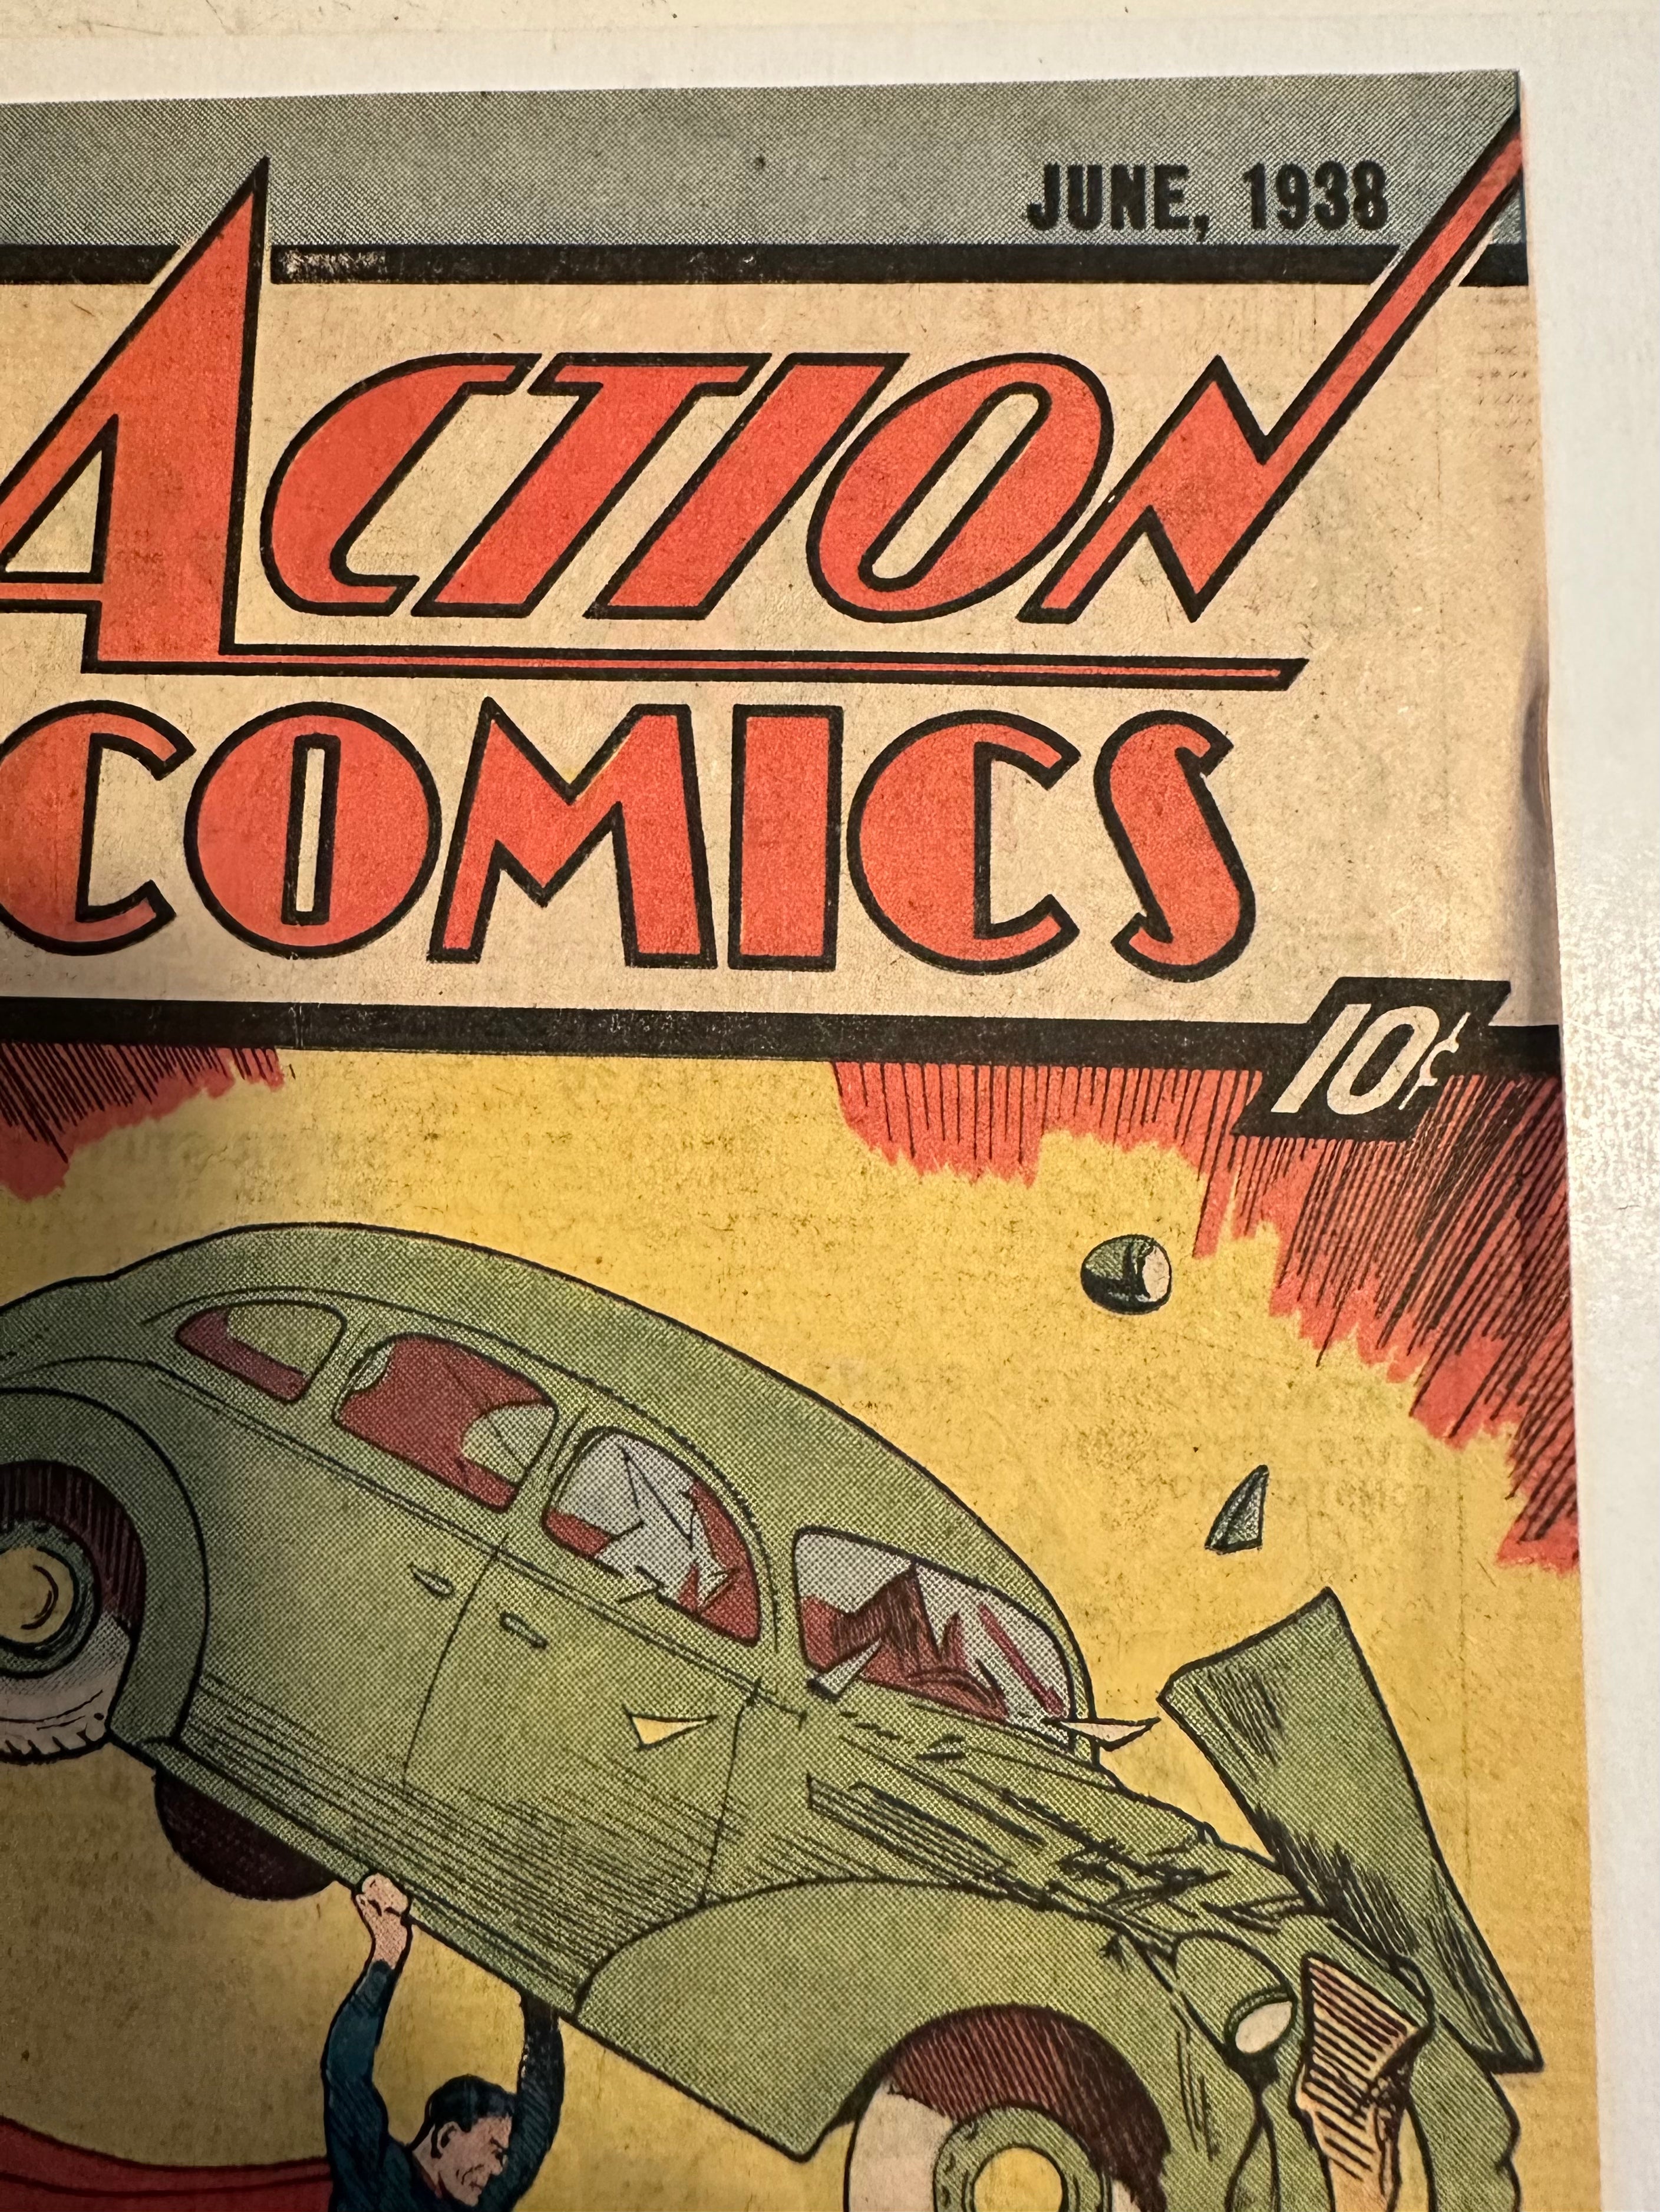 Action Comics #1 rare reprint comic limited issued 1976